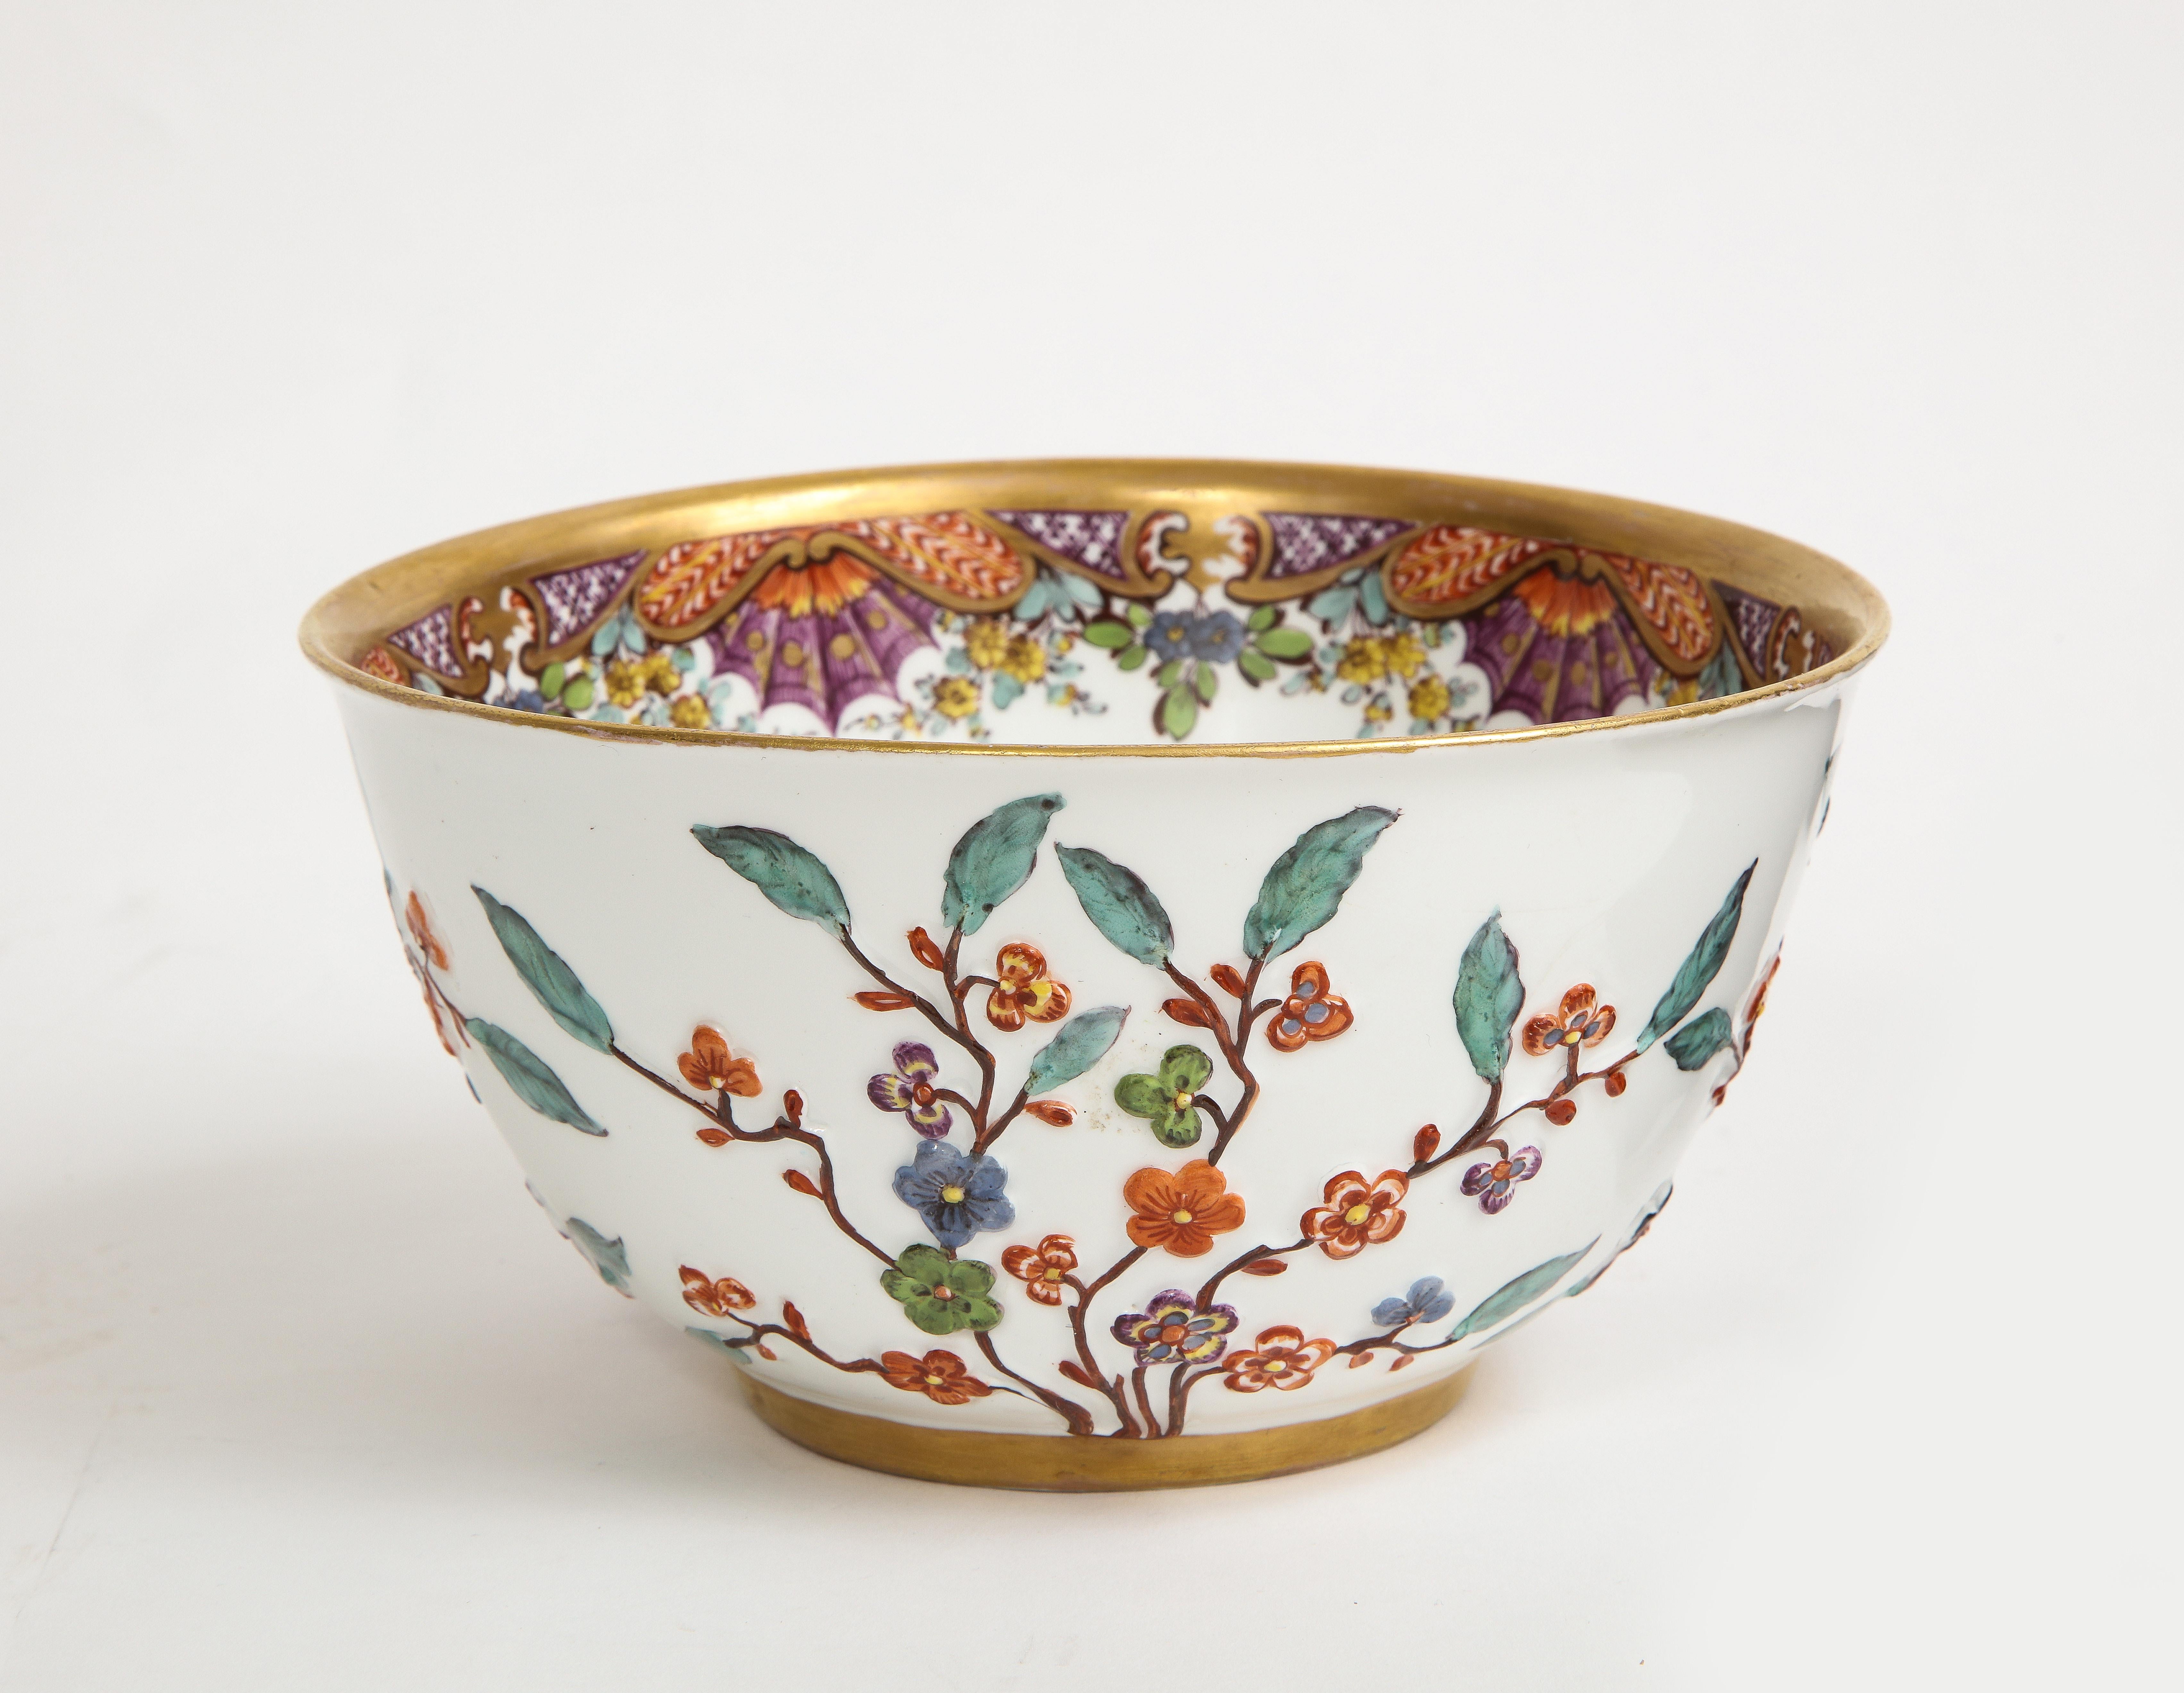 An Incredible and Rare 18th Century Meissen Hausmaler Decorated Bowl with High Relief Multi-Colored Flowers.  Hand-carved with encrusted and relief flowers which decorate the exterior wall of the bowl.  The bowl is decorated with Hausmaler designs,